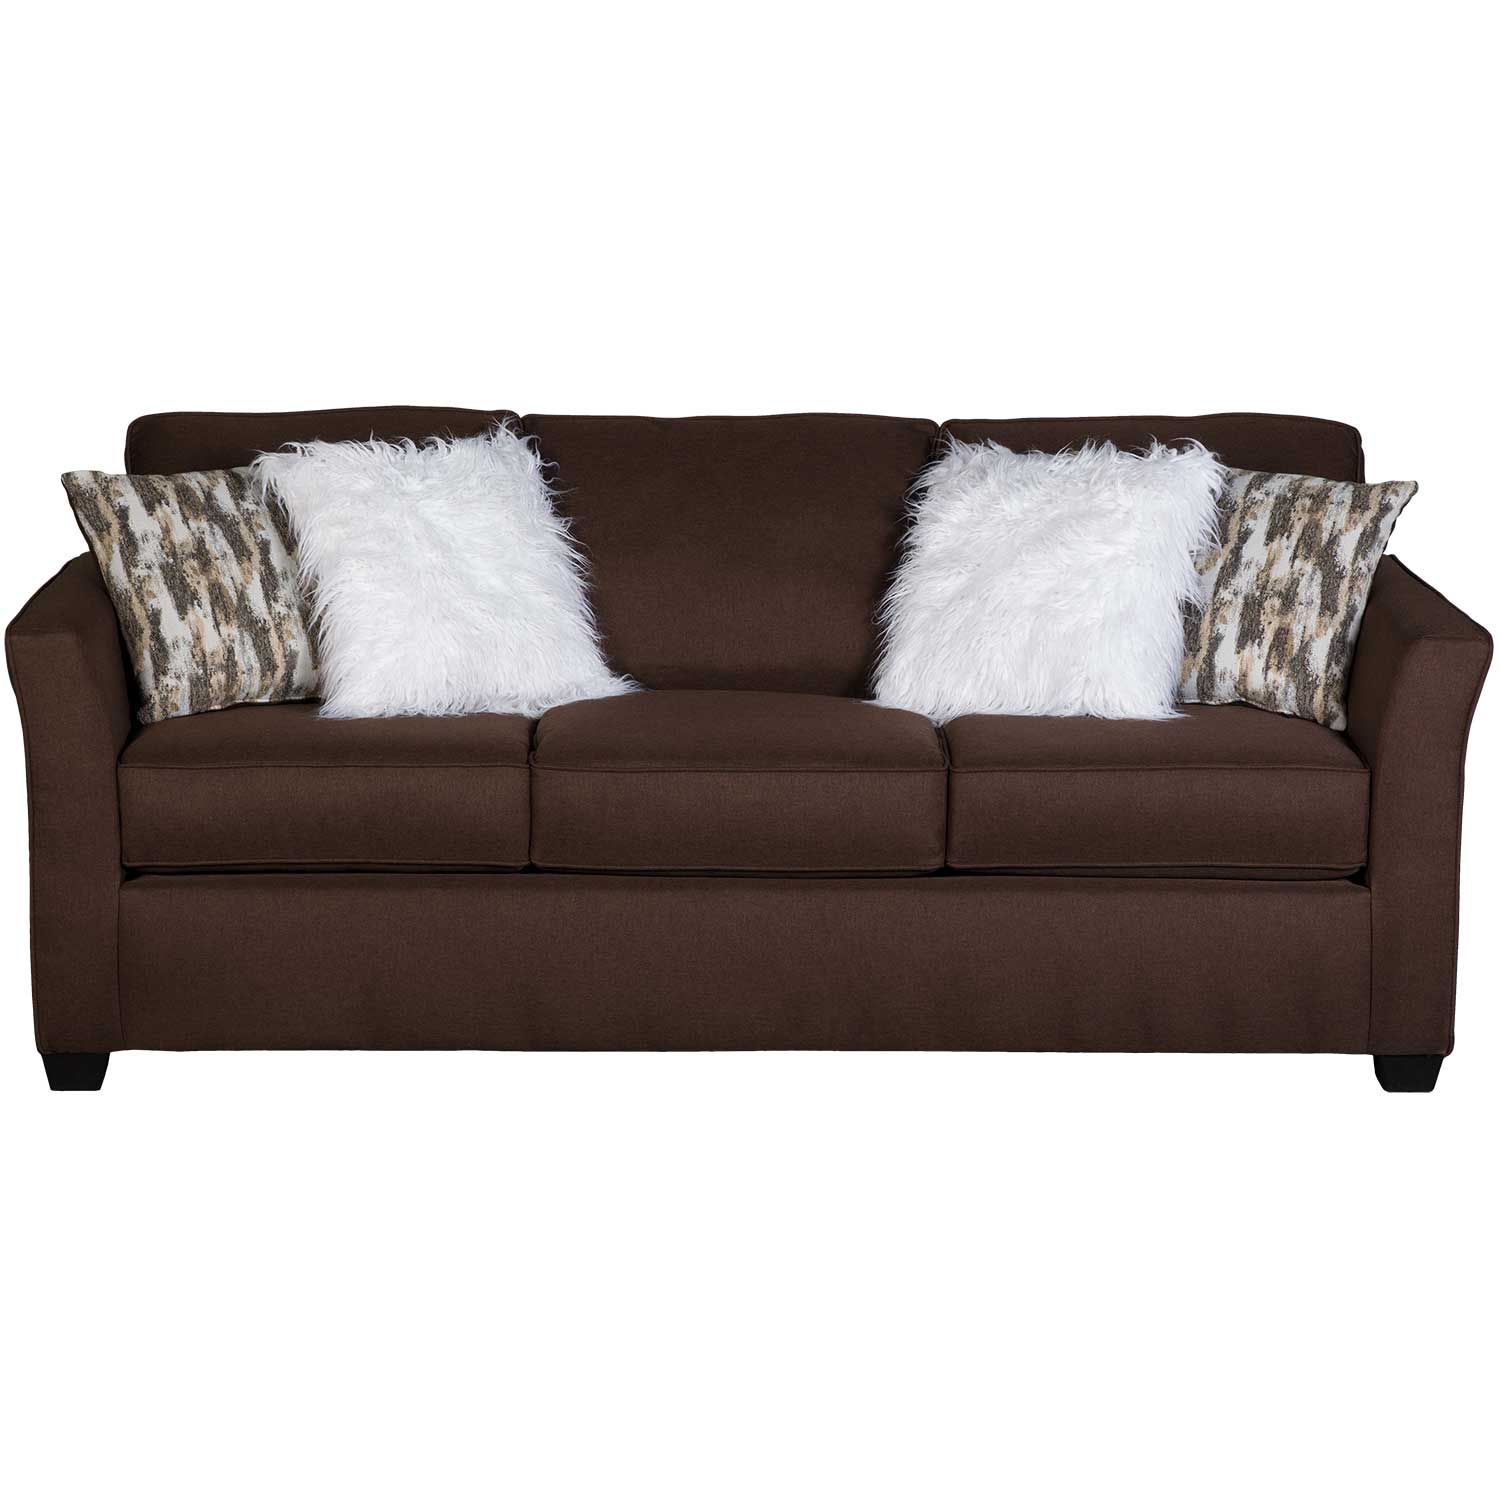 Keegan Chocolate Brown Sofa | Z 1003 | Afw With Sofas In Chocolate Brown (View 4 of 15)